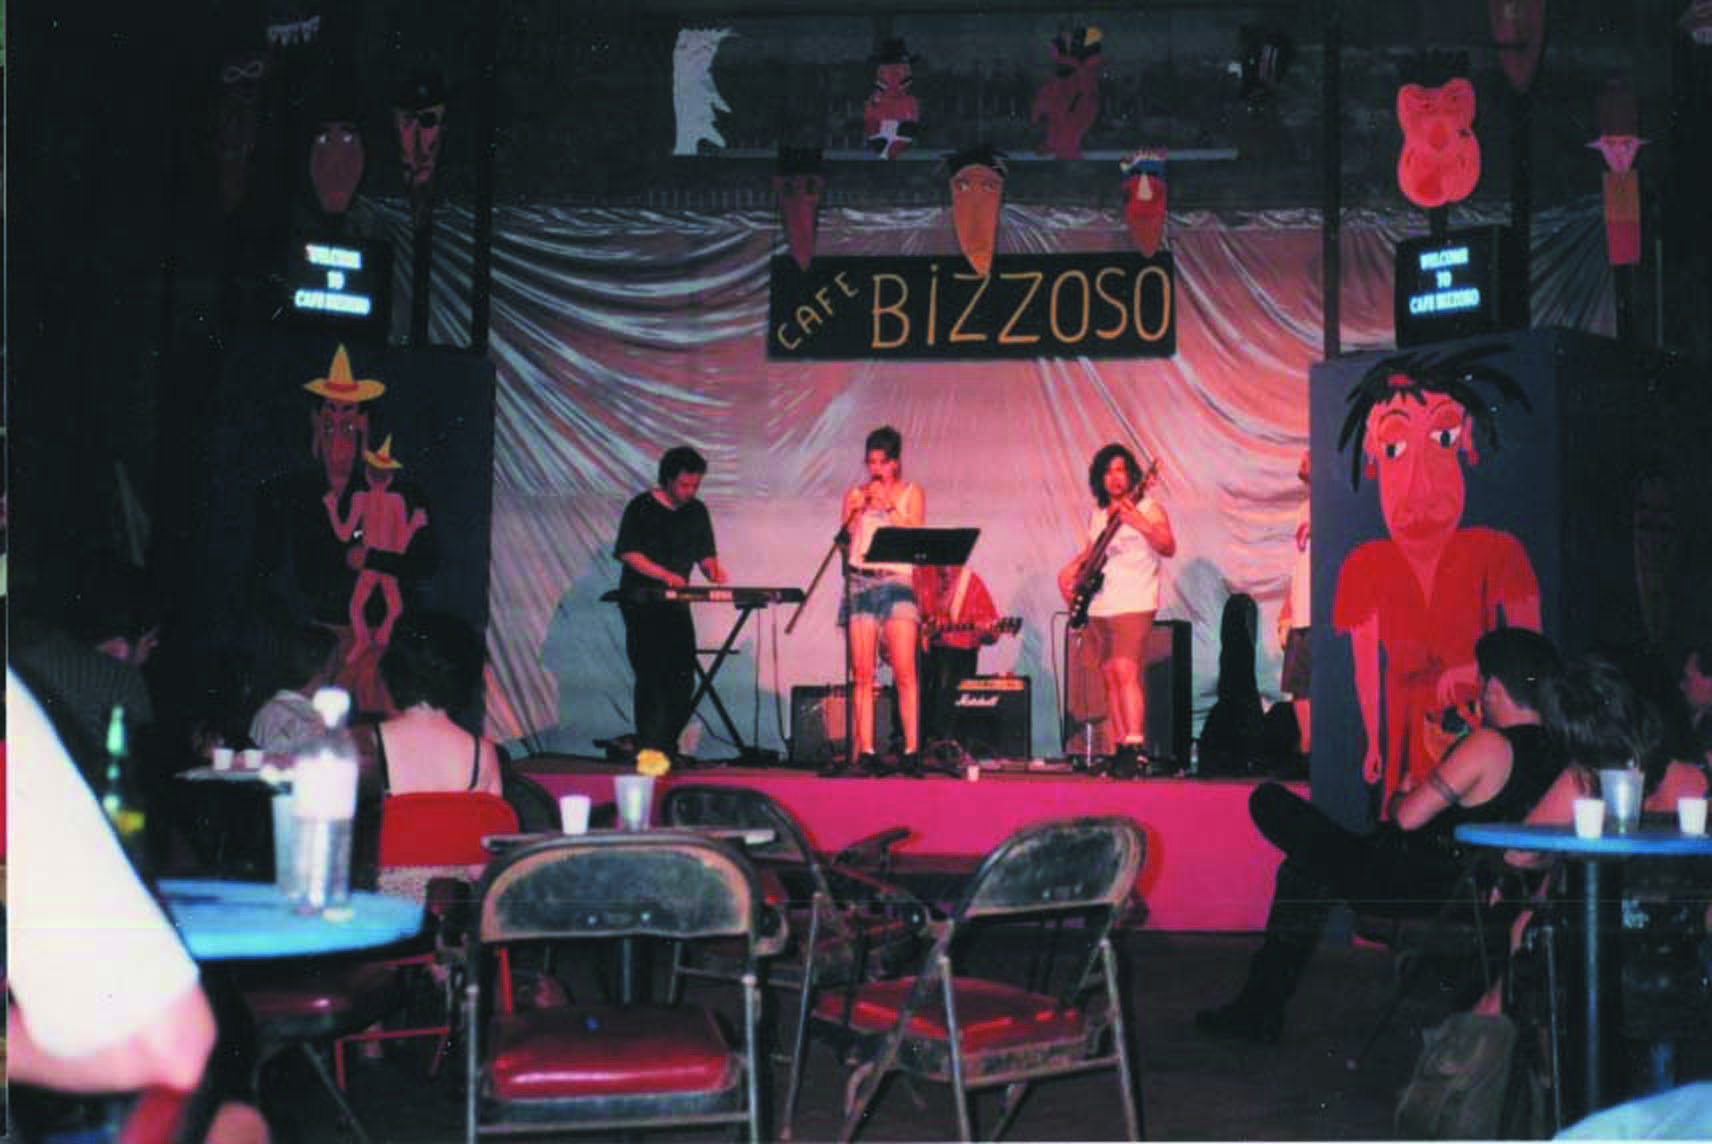 A photo of a band set up to perform at Cafe Bizzosos.